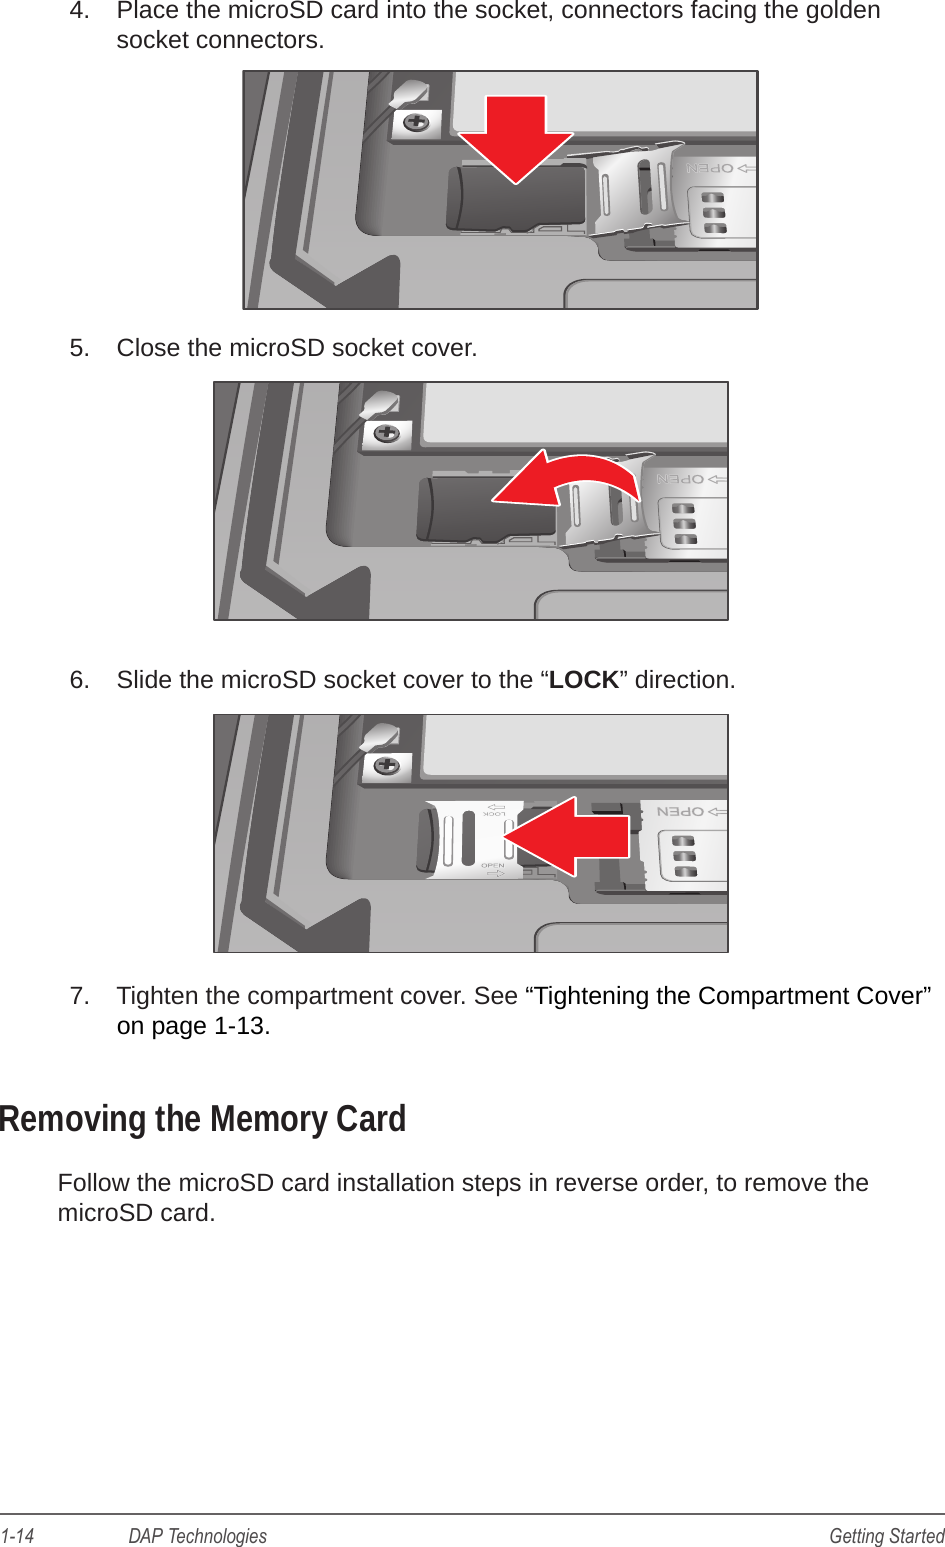 1-14                    DAP Technologies Getting Started4.  Place the microSD card into the socket, connectors facing the golden socket connectors.5.  Close the microSD socket cover.6.  Slide the microSD socket cover to the “LOCK” direction.7.  Tighten the compartment cover. See “Tightening the Compartment Cover” on page 1-13. Removing the Memory CardFollow the microSD card installation steps in reverse order, to remove the microSD card.